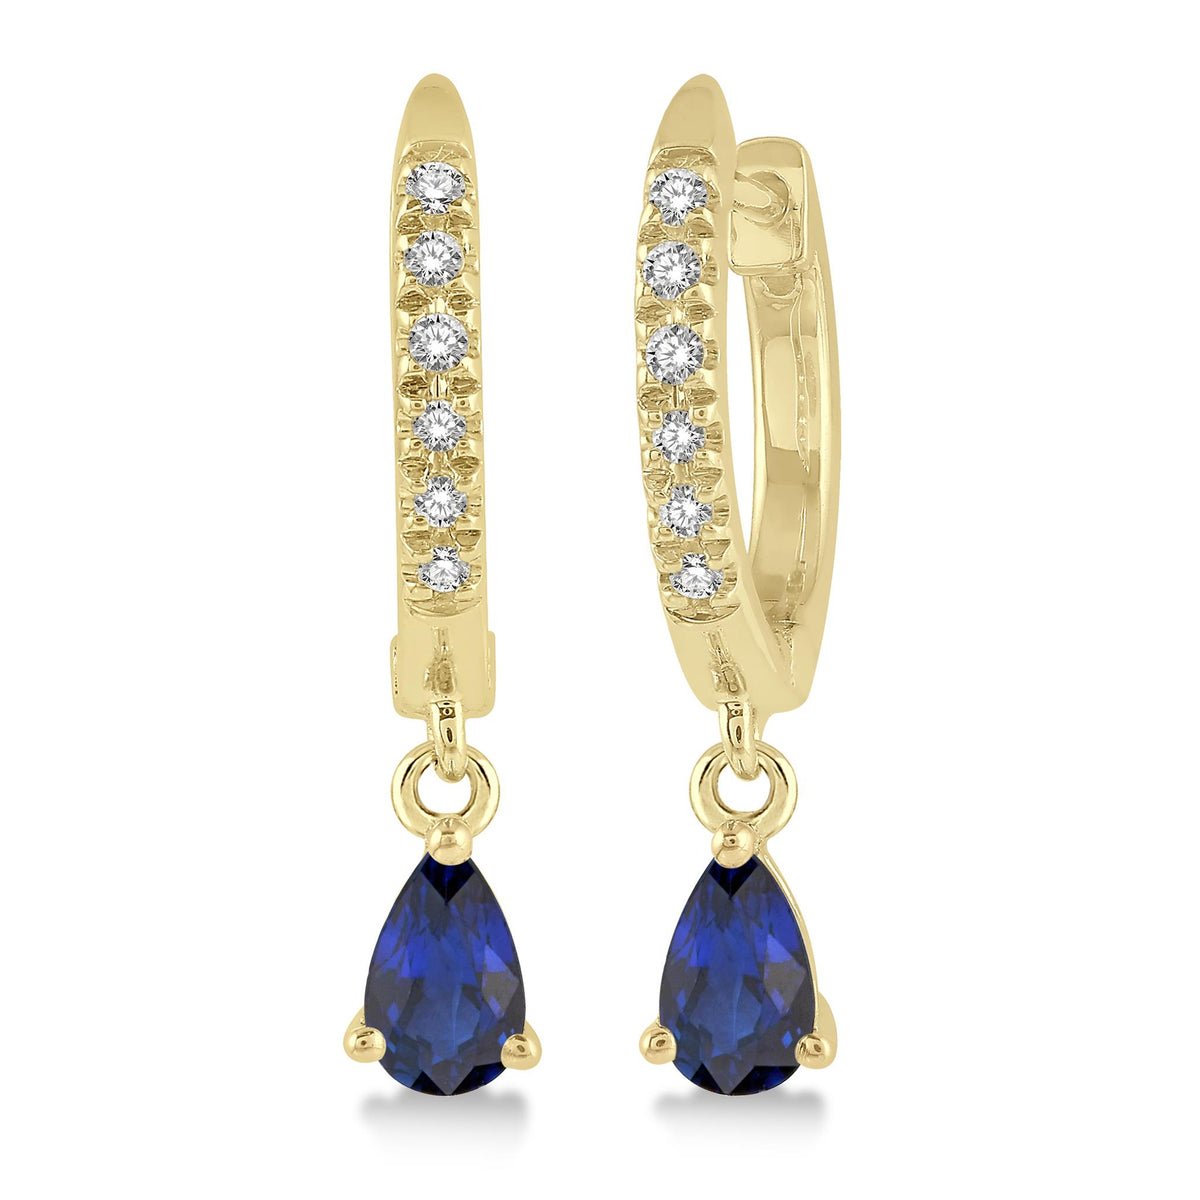 Lasker Petites-10Kt Yellow Gold Hoop Earrings With 0.12ct Natural Diamonds and Sapphires